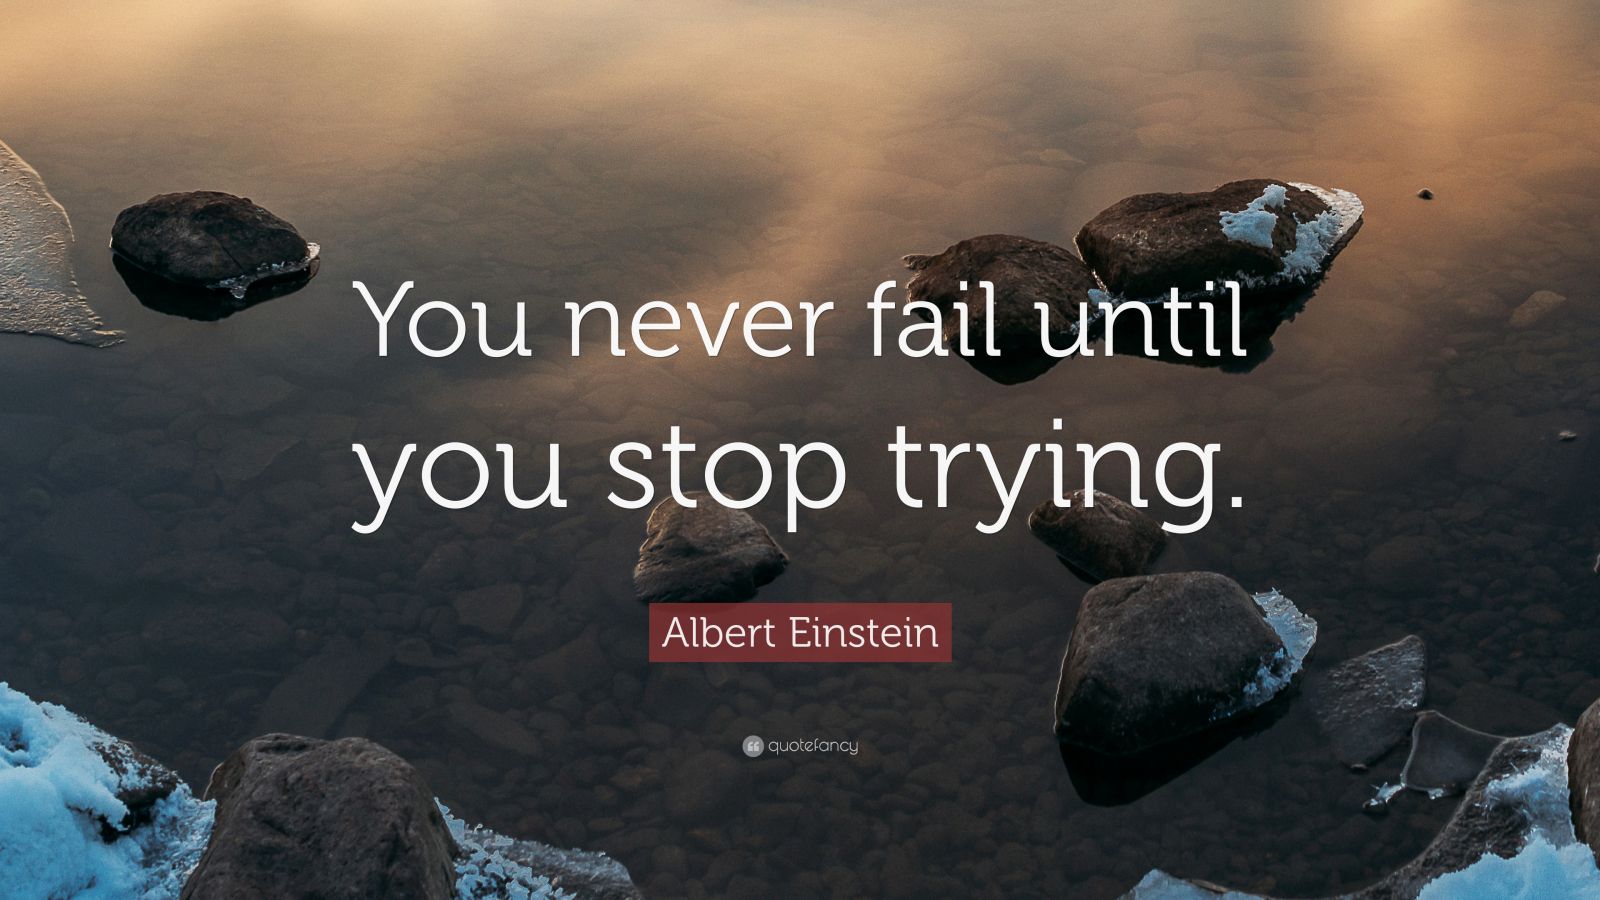 Albert Einstein Quote: “You never fail until you stop trying.” (35 ...